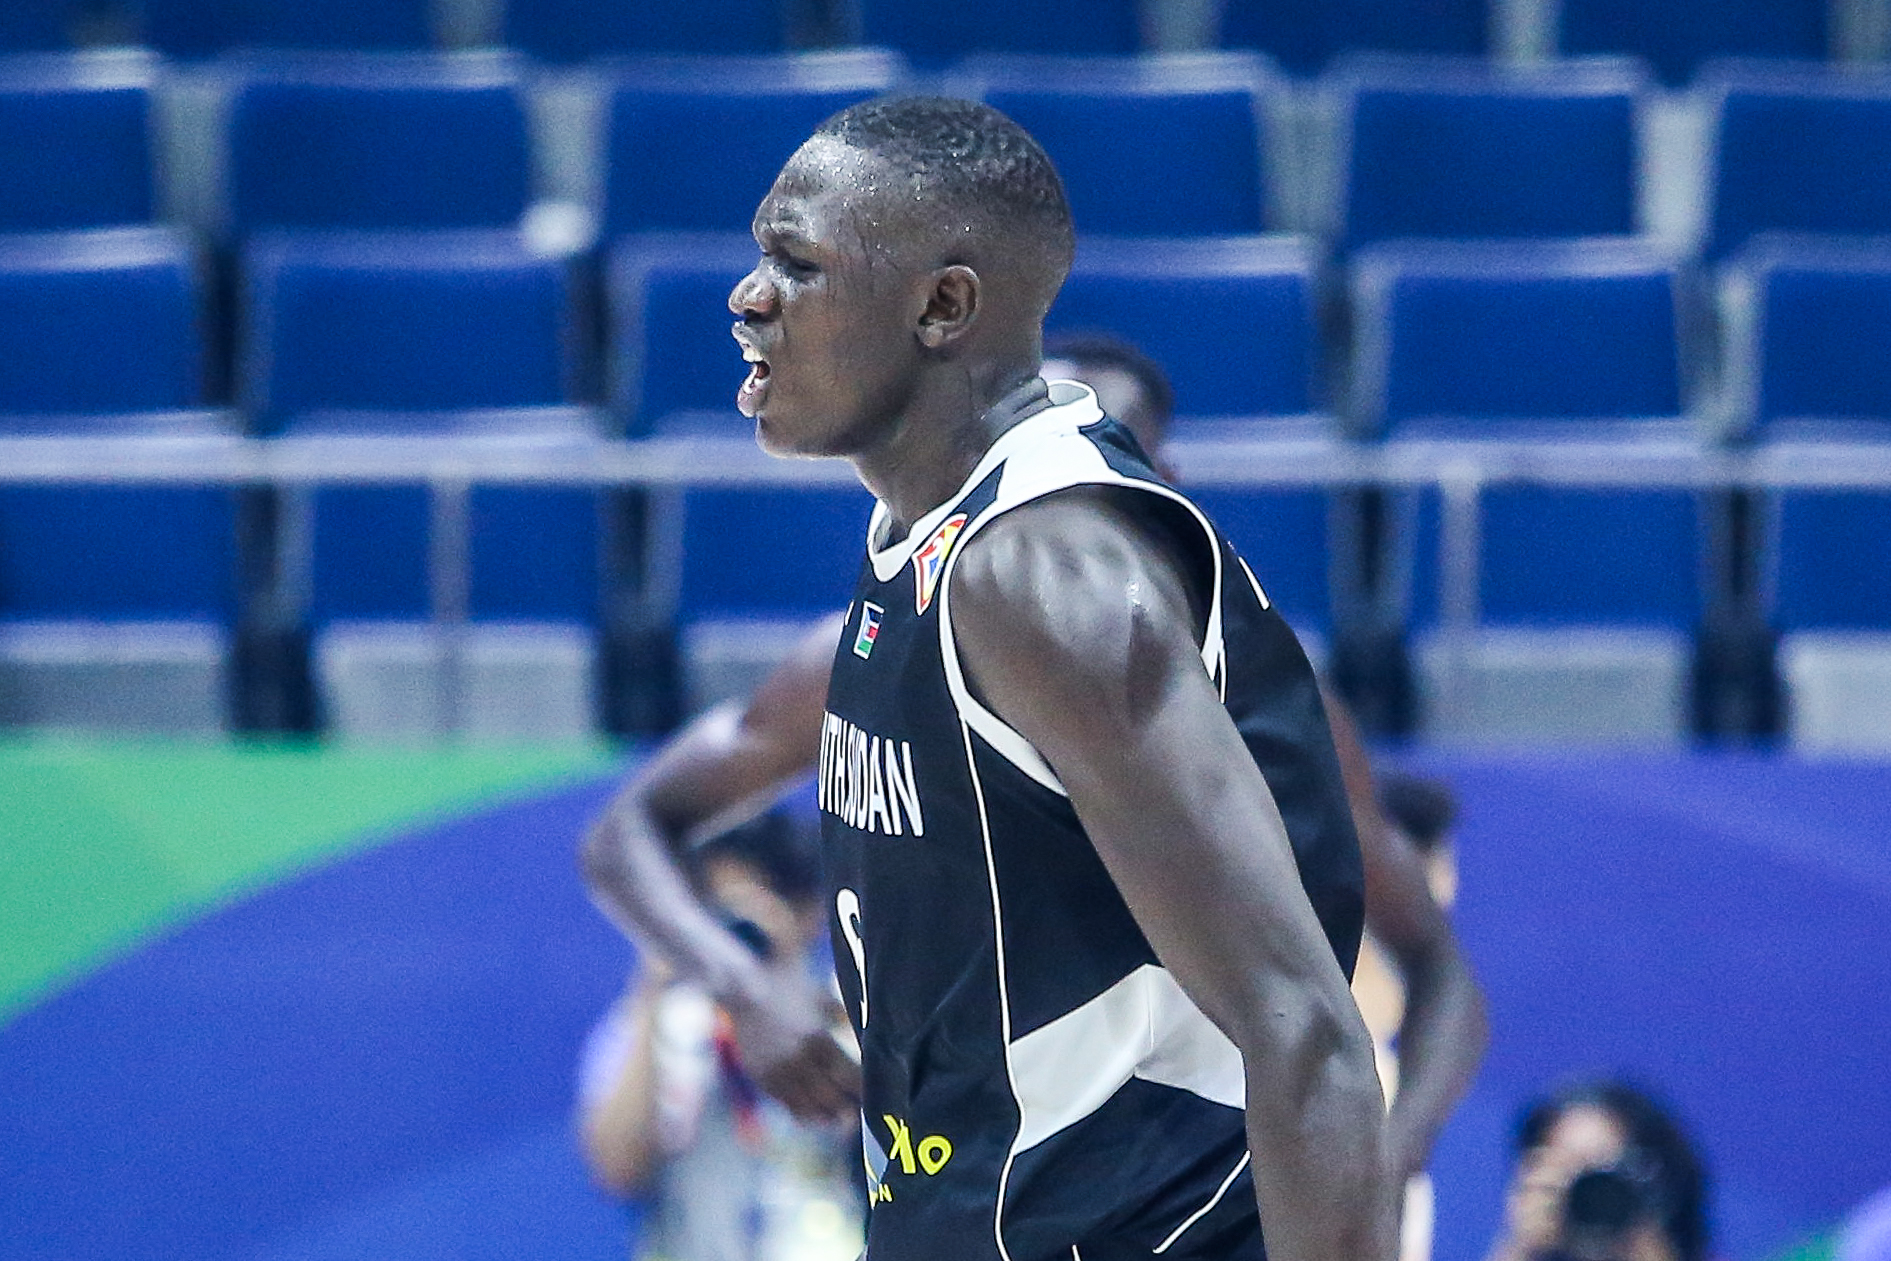 South Sudan’s basketball future is a teenager who idolizes Jokic